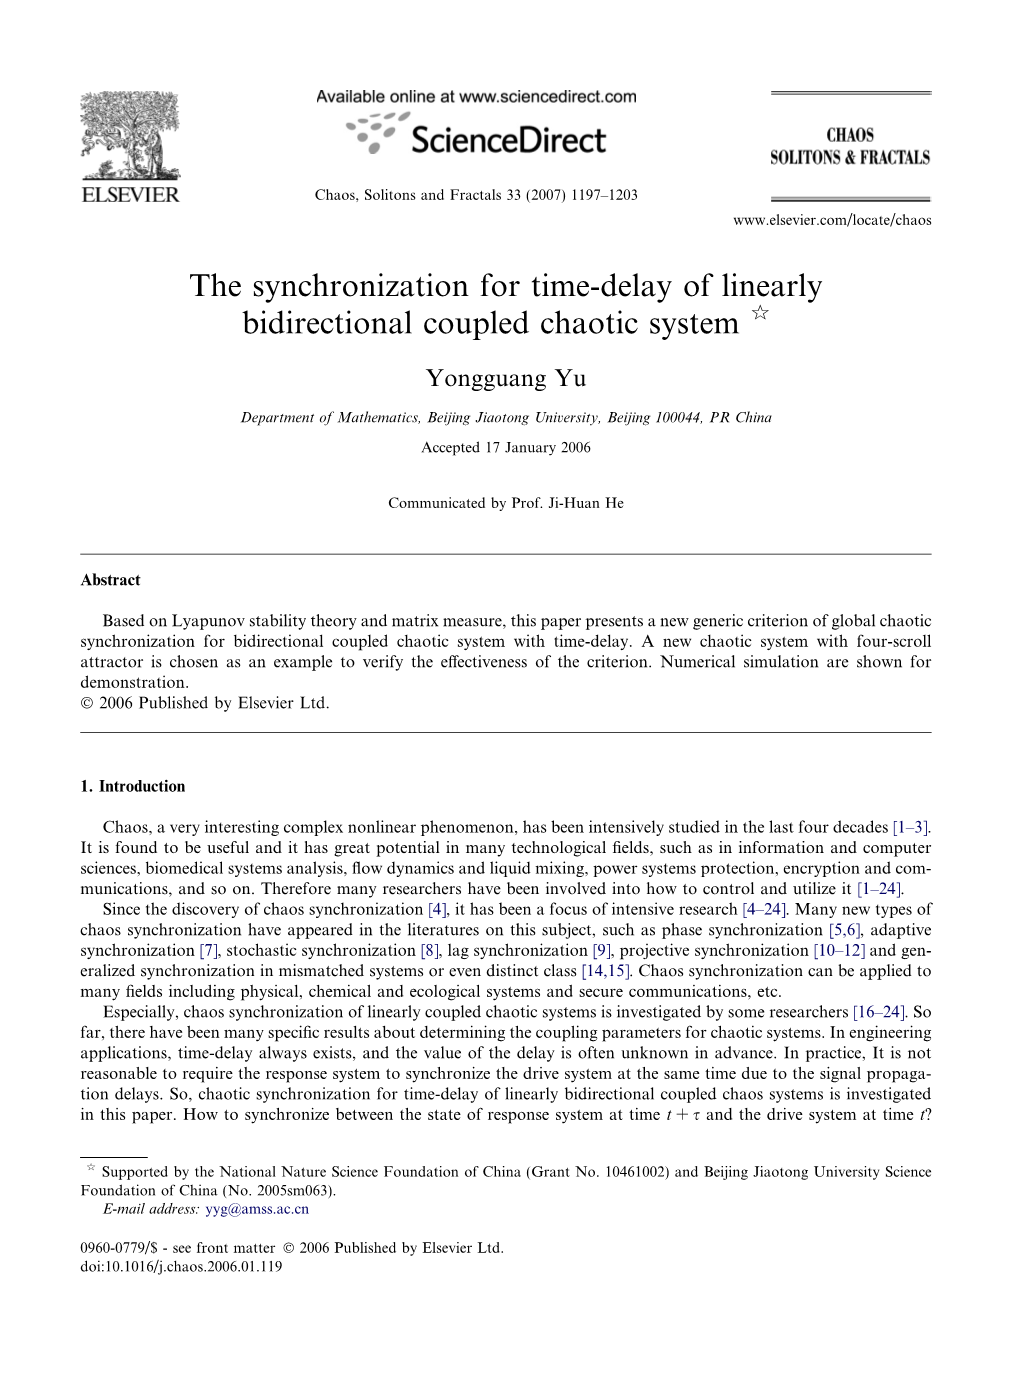 The Synchronization for Time-Delay of Linearly Bidirectional Coupled Chaotic System Q